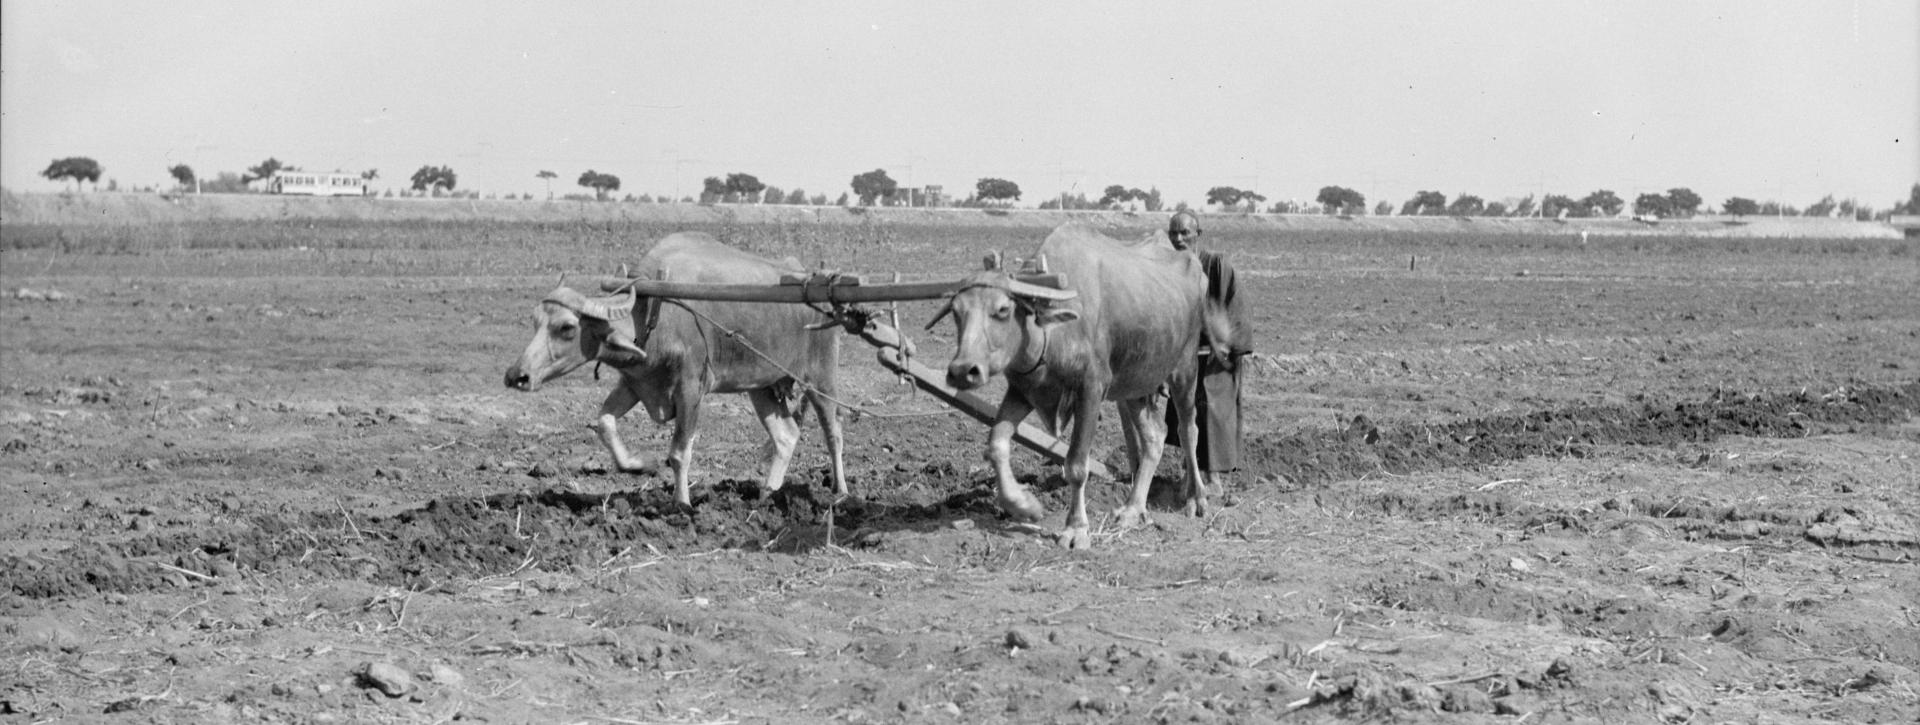 Plowing a Field with Buffalos, 1930s.